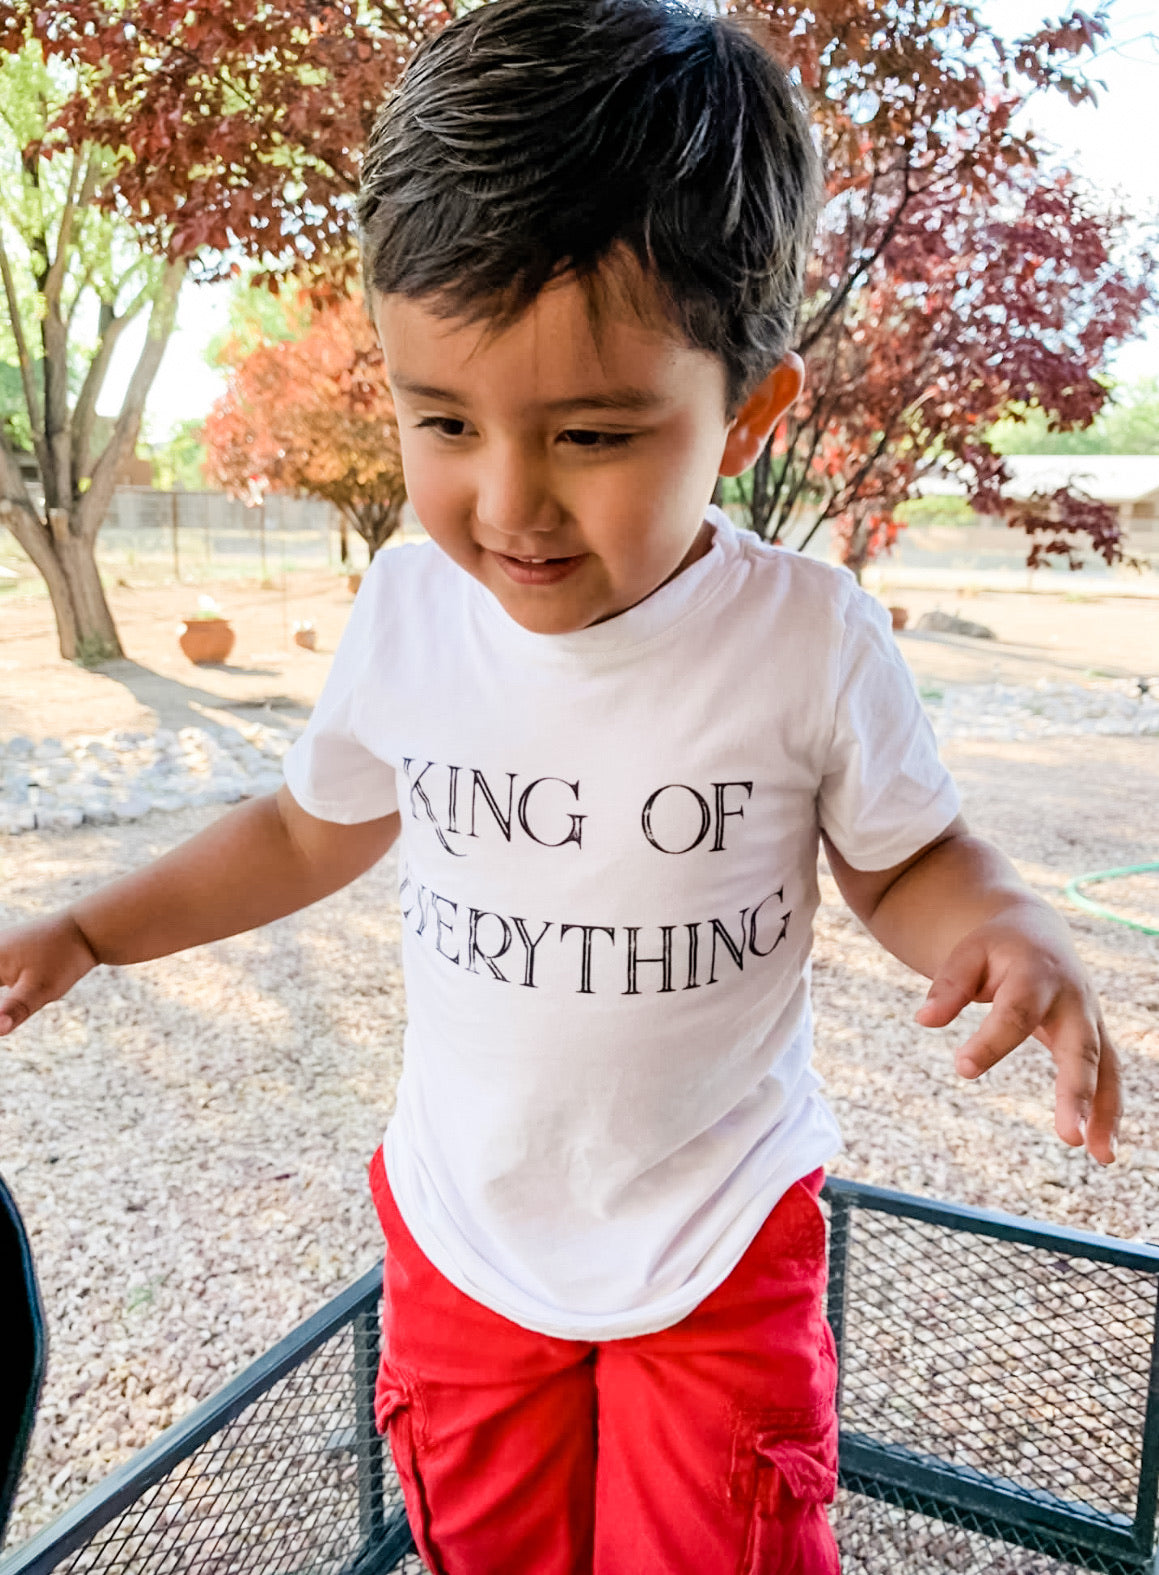 King of Everything Tee in White